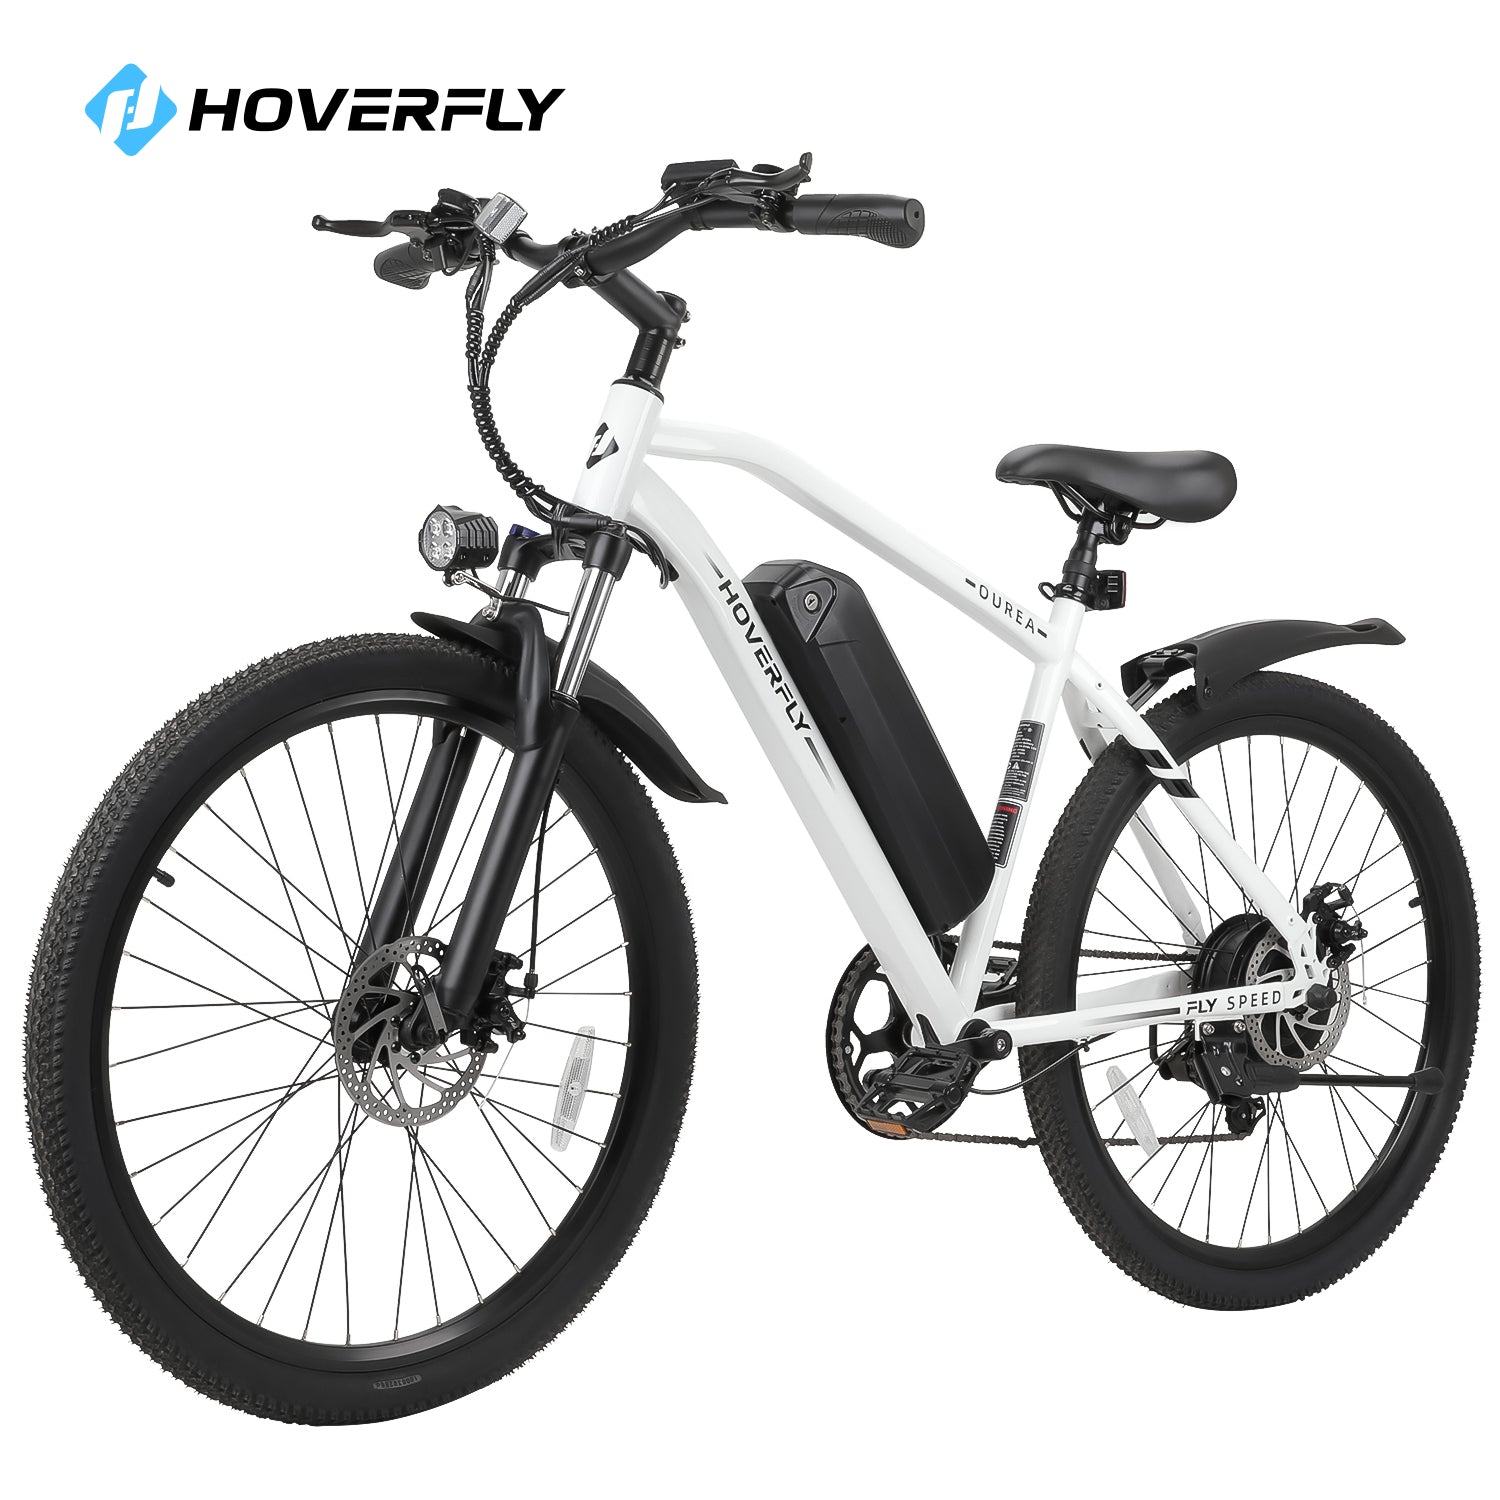 Hoverfly Ourea Commuter Electric Bike in Pristine White, Showcasing Its Sleek Design and Powerful 500W Motor. Perfect for Commuting and Adventure, This Electric Bike Offers Unparalleled Versatility and Style.